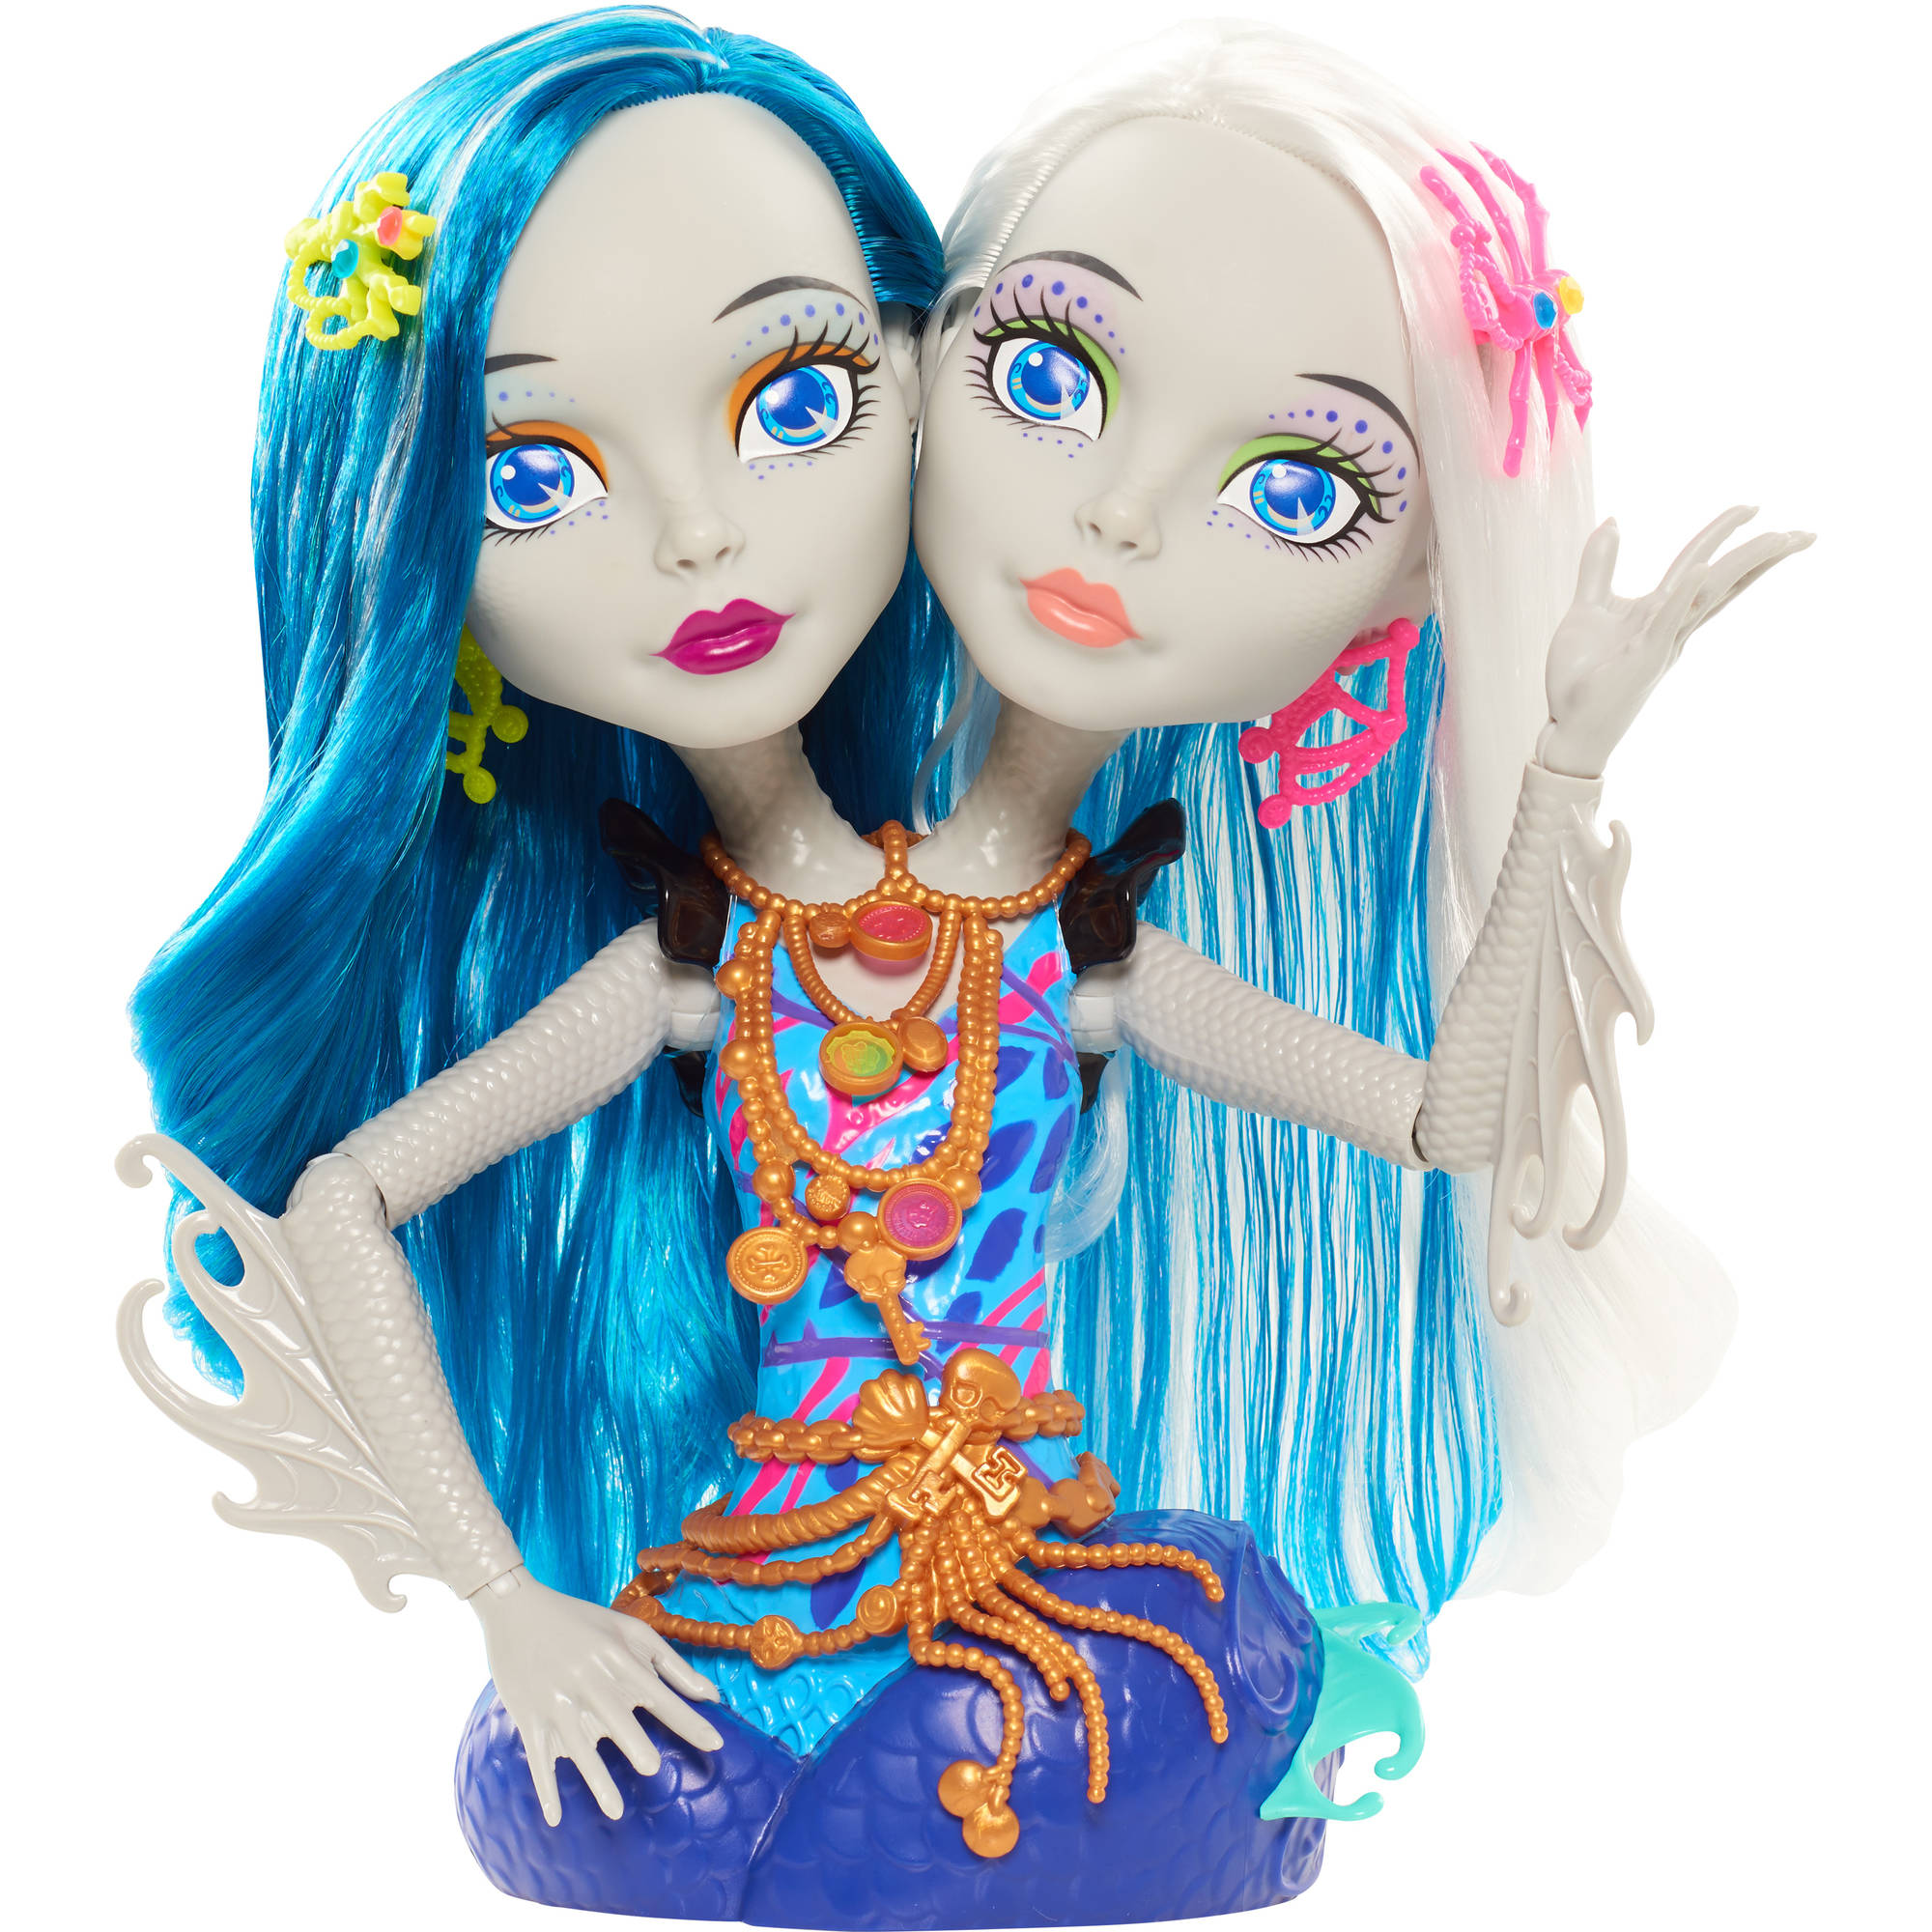 Monster High Peri and Pearl Serpentine Styling Head - image 2 of 4